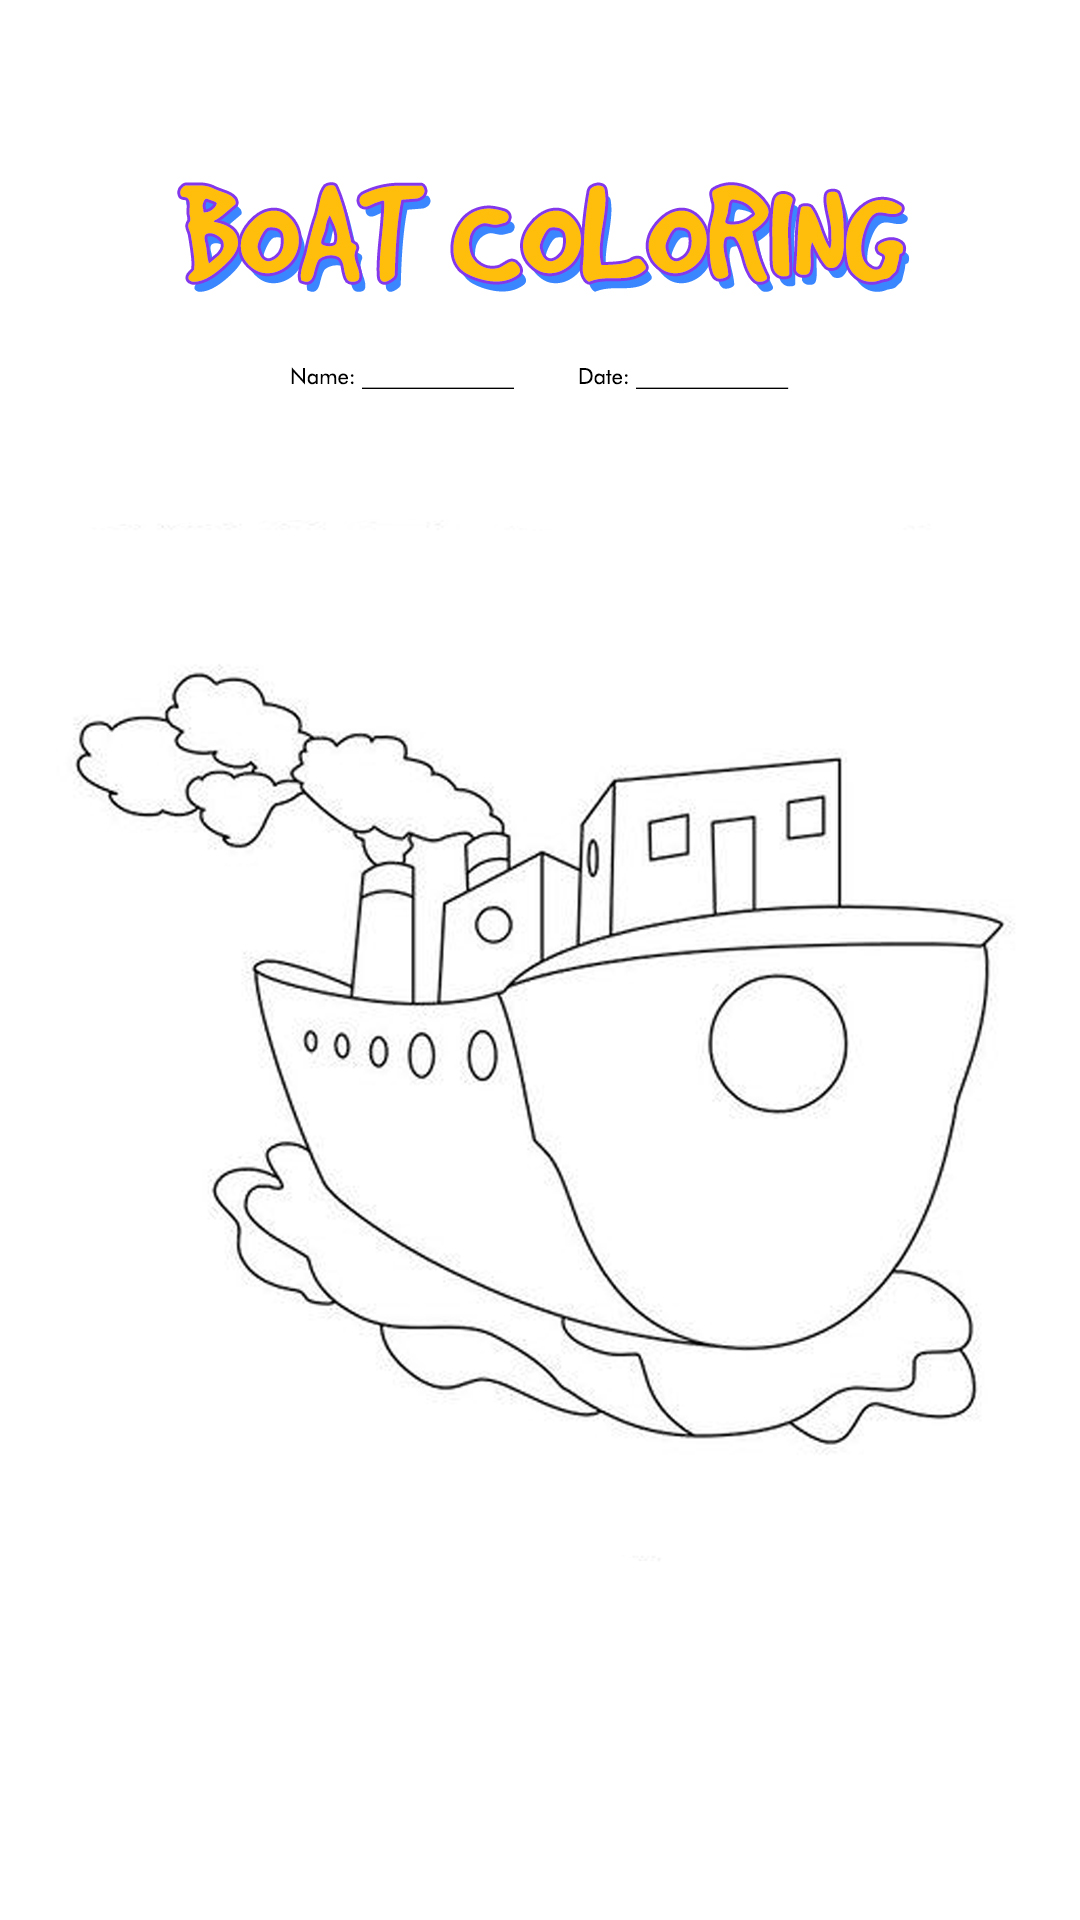 Boat Coloring Pages Image